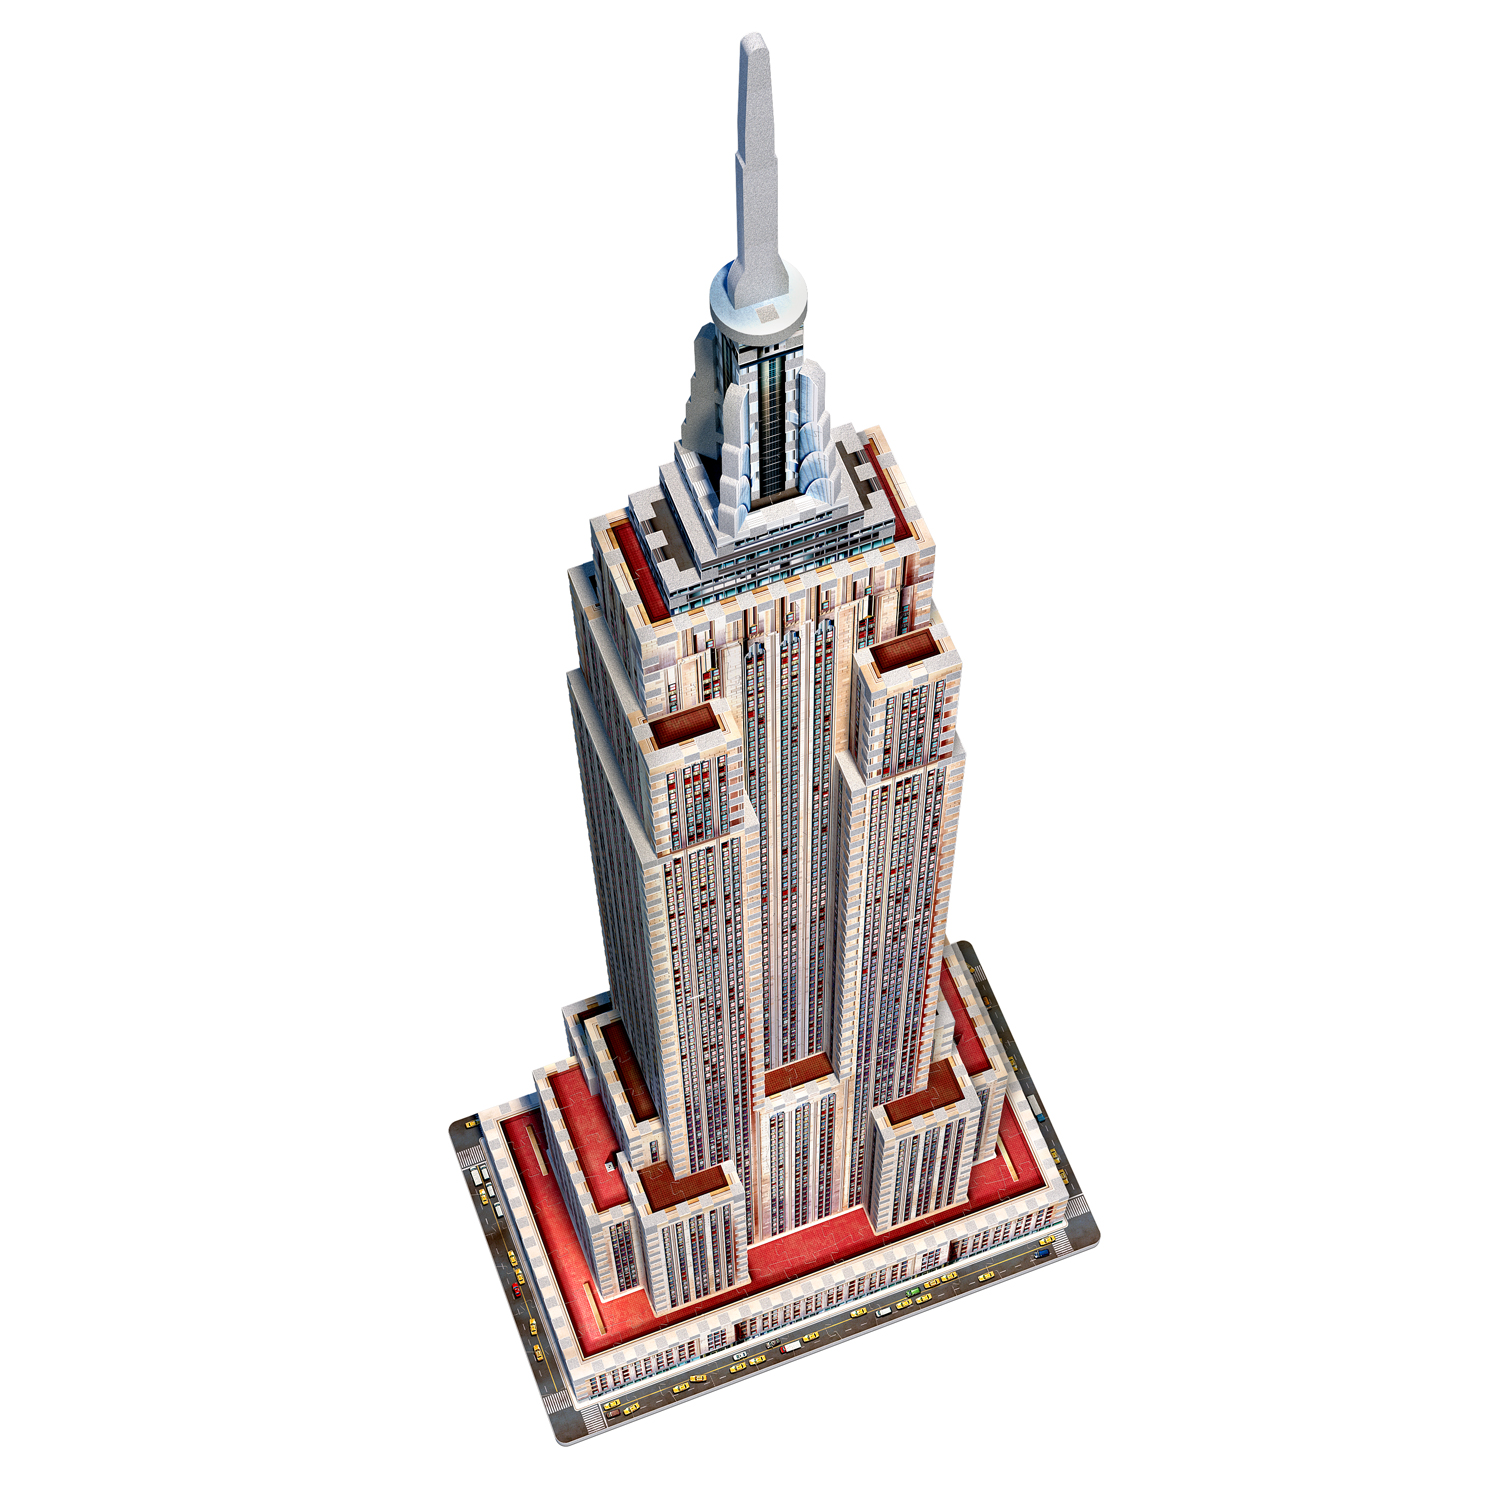 3D Jigsaw Woodcraft Kit Wooden Puzzle Empire State Building NY 